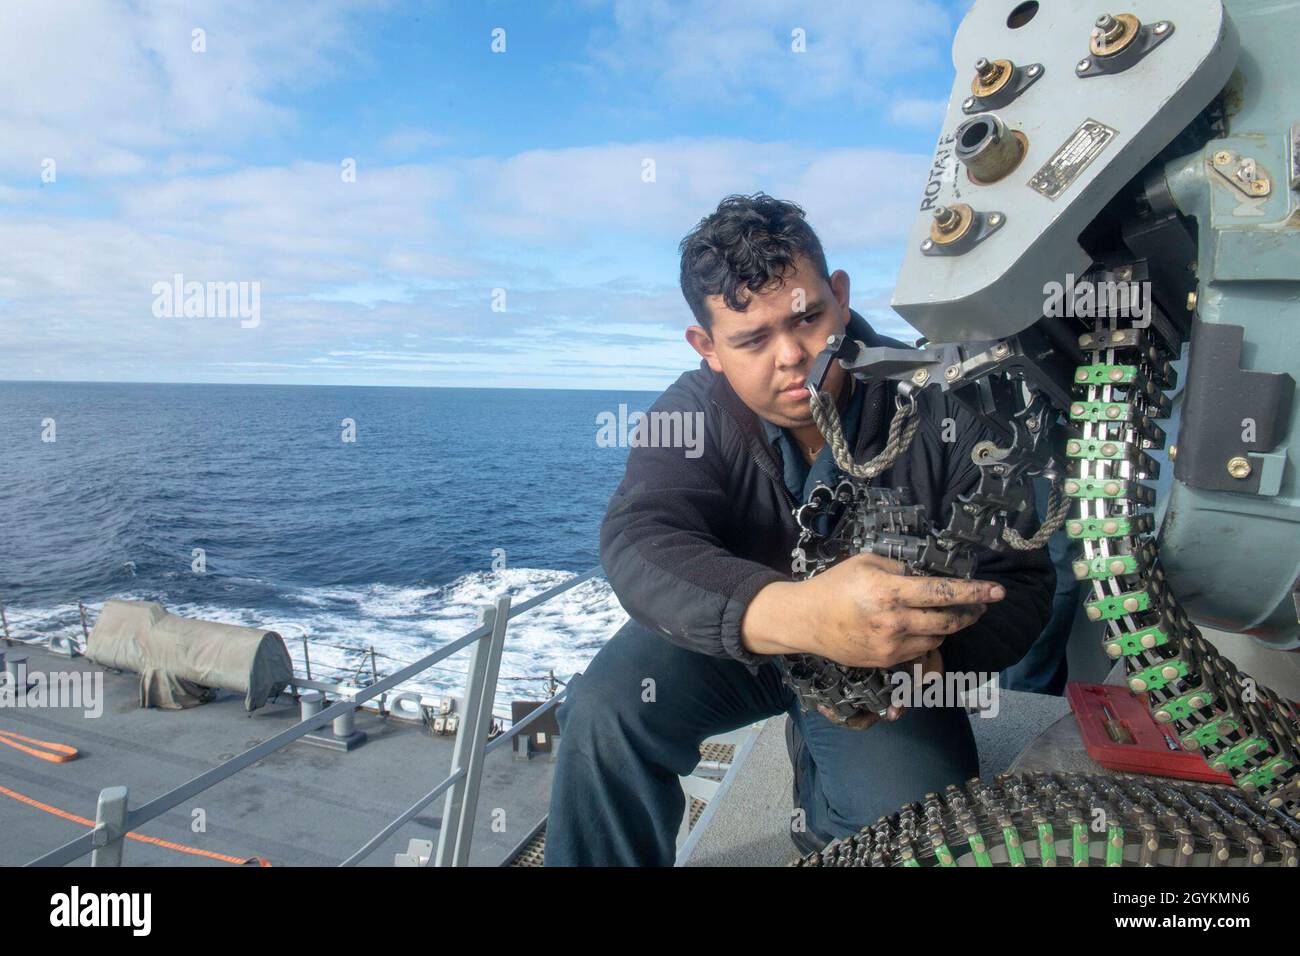 PACIFIC OCEAN (Jan. 21, 2020) Fire Controlman 2nd Class Oscar Mantillo, from Spokane, Wash., removes elements from the Phalanx close-in weapon system (CIWS) aboard the Arleigh Burke-class guided-missile destroyer USS Paul Hamilton (DDG 60) Jan. 21, 2020. Paul Hamilton, part of the Theodore Roosevelt Carrier Strike Group, is on a scheduled deployment to the Indo-Pacific. (U.S. Navy photo by Mass Communication Specialist 3rd Class Matthew F. Jackson) Stock Photo